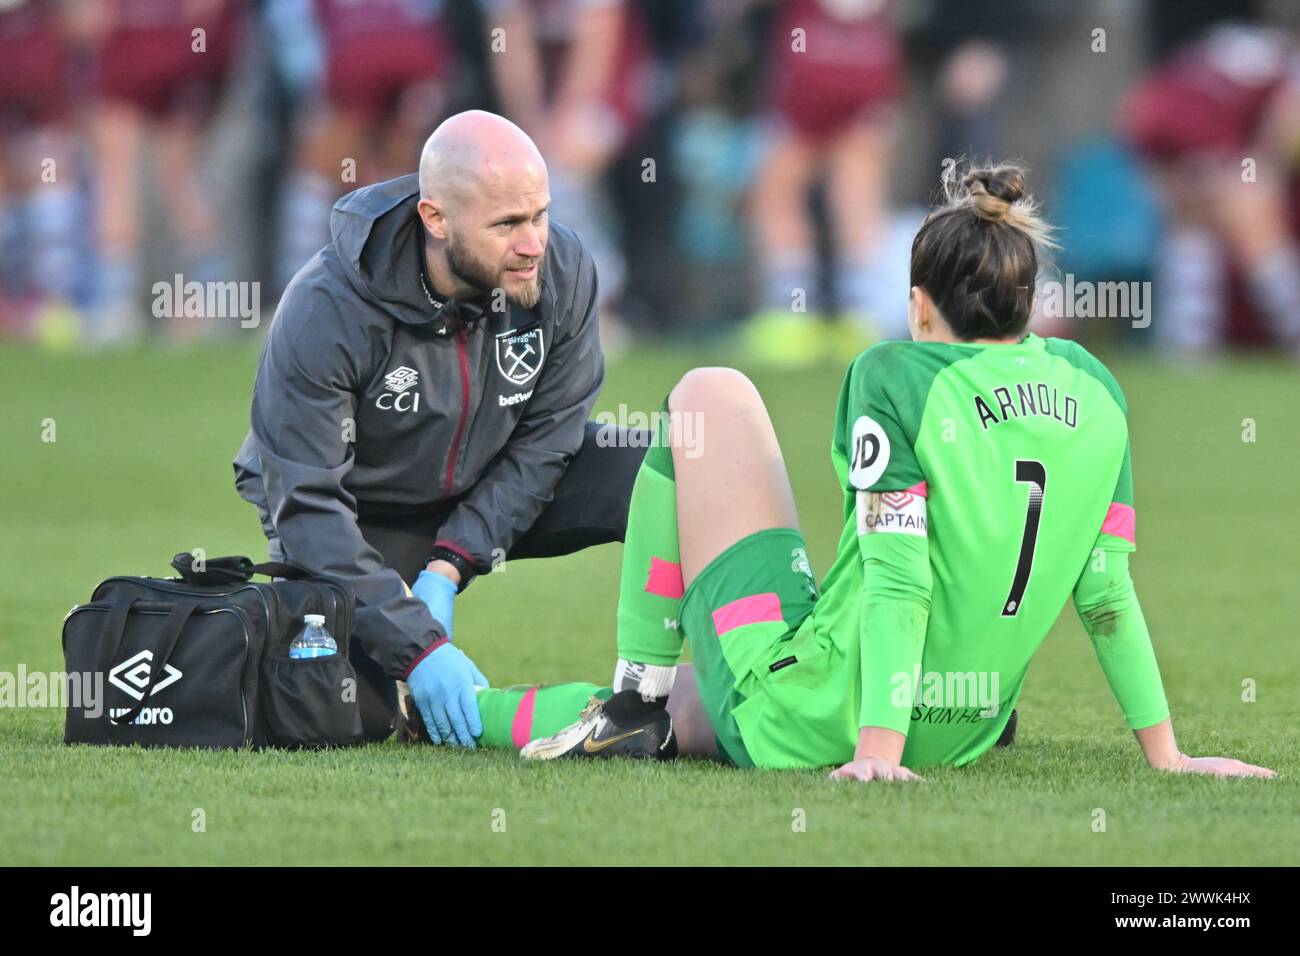 Dagenham on Sunday 24th March 2024. Goalkeeper Mackenzie Arnold (1 West Ham) receives medical treatment during the Barclays FA Women's Super League match between West Ham United and Chelsea at the Chigwell Construction Stadium, Dagenham on Sunday 24th March 2024. (Photo: Kevin Hodgson | MI News) Credit: MI News & Sport /Alamy Live News Stock Photo